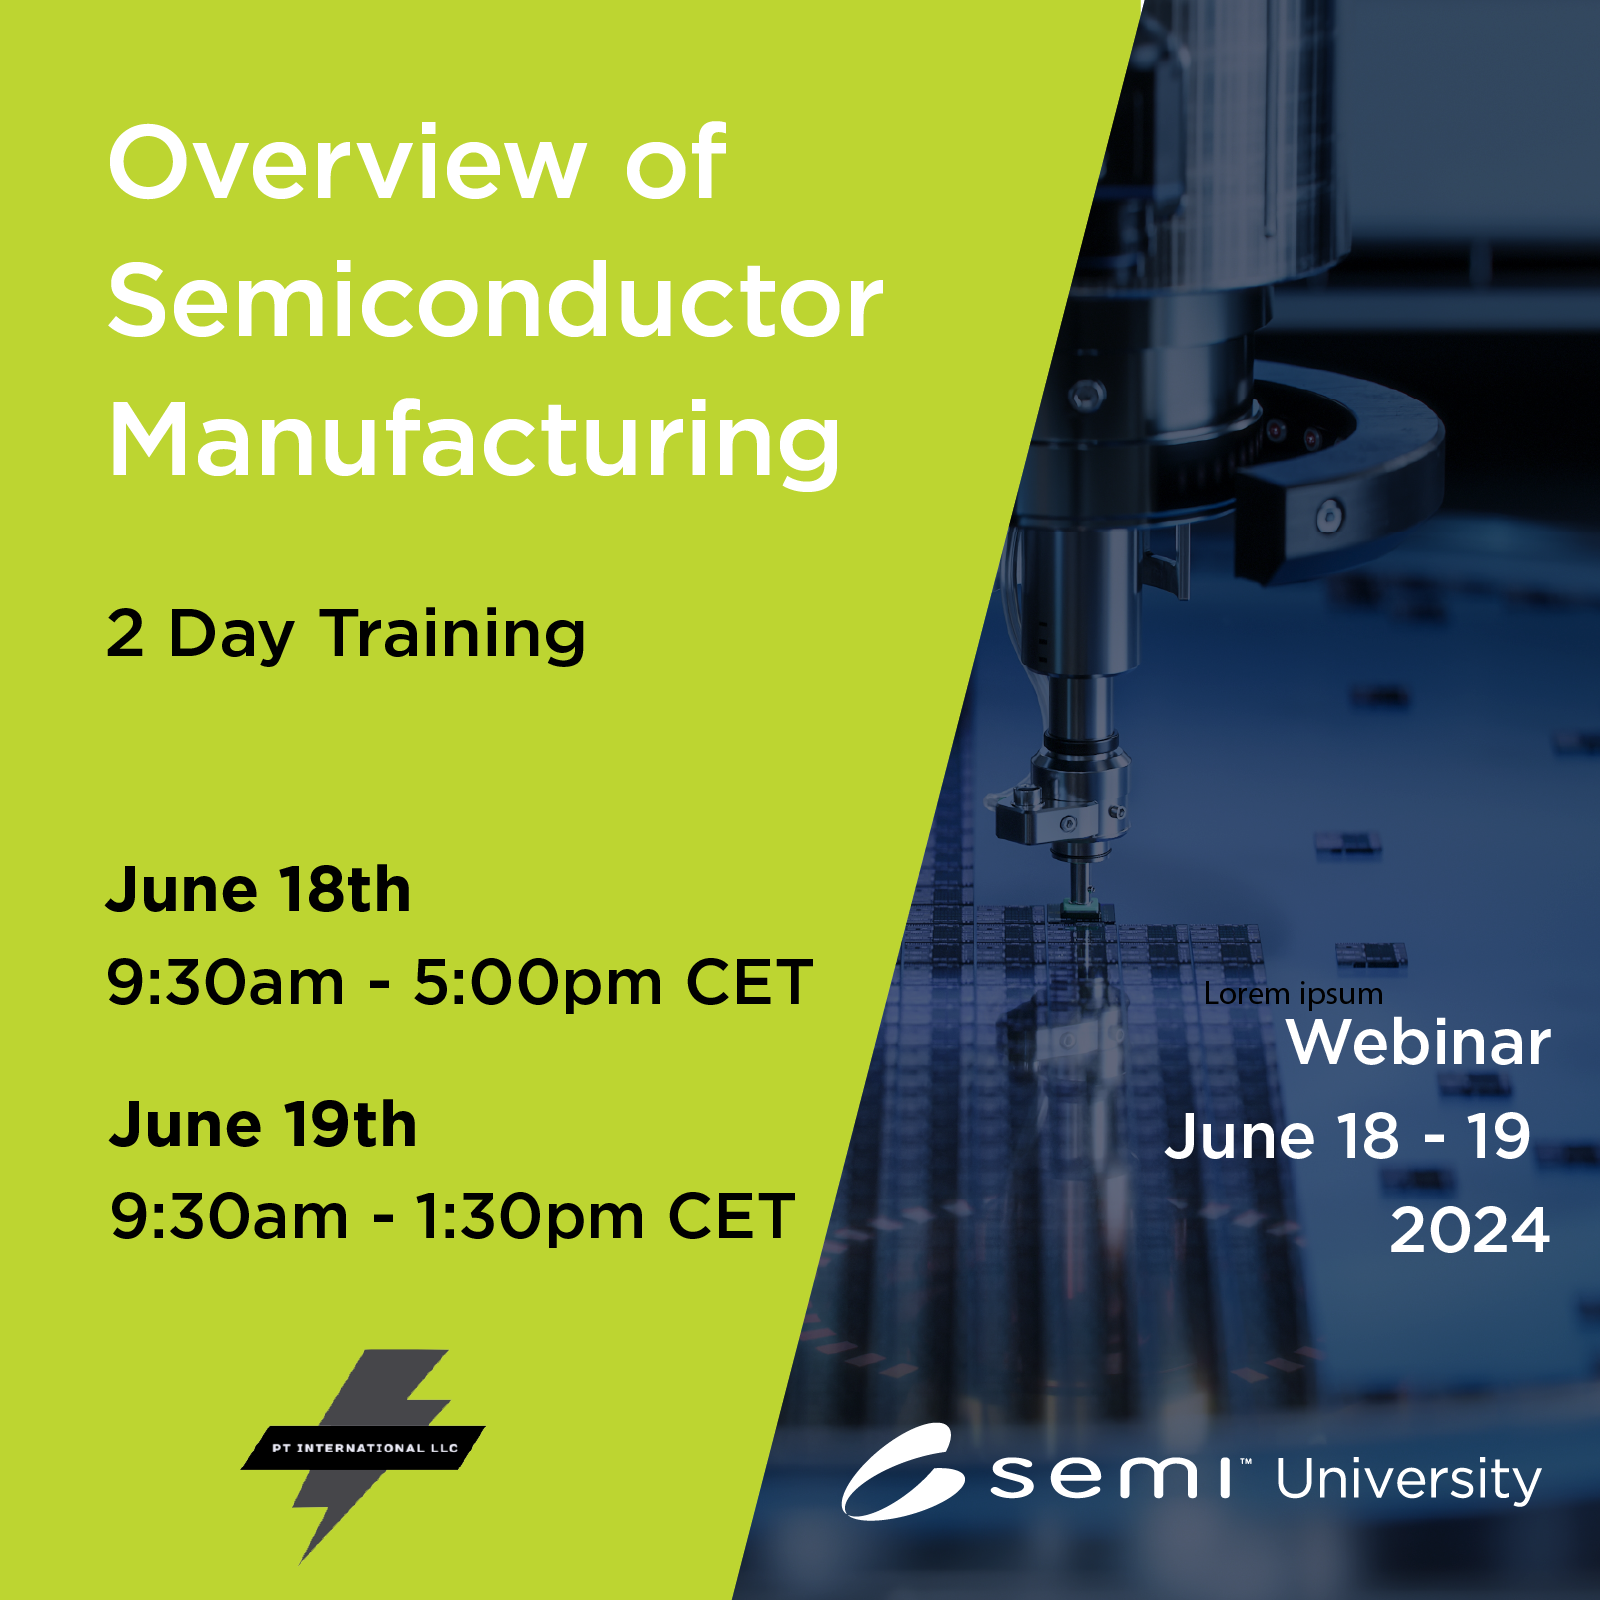 Overview of Semiconductor Manufacturing June 2024 Europe